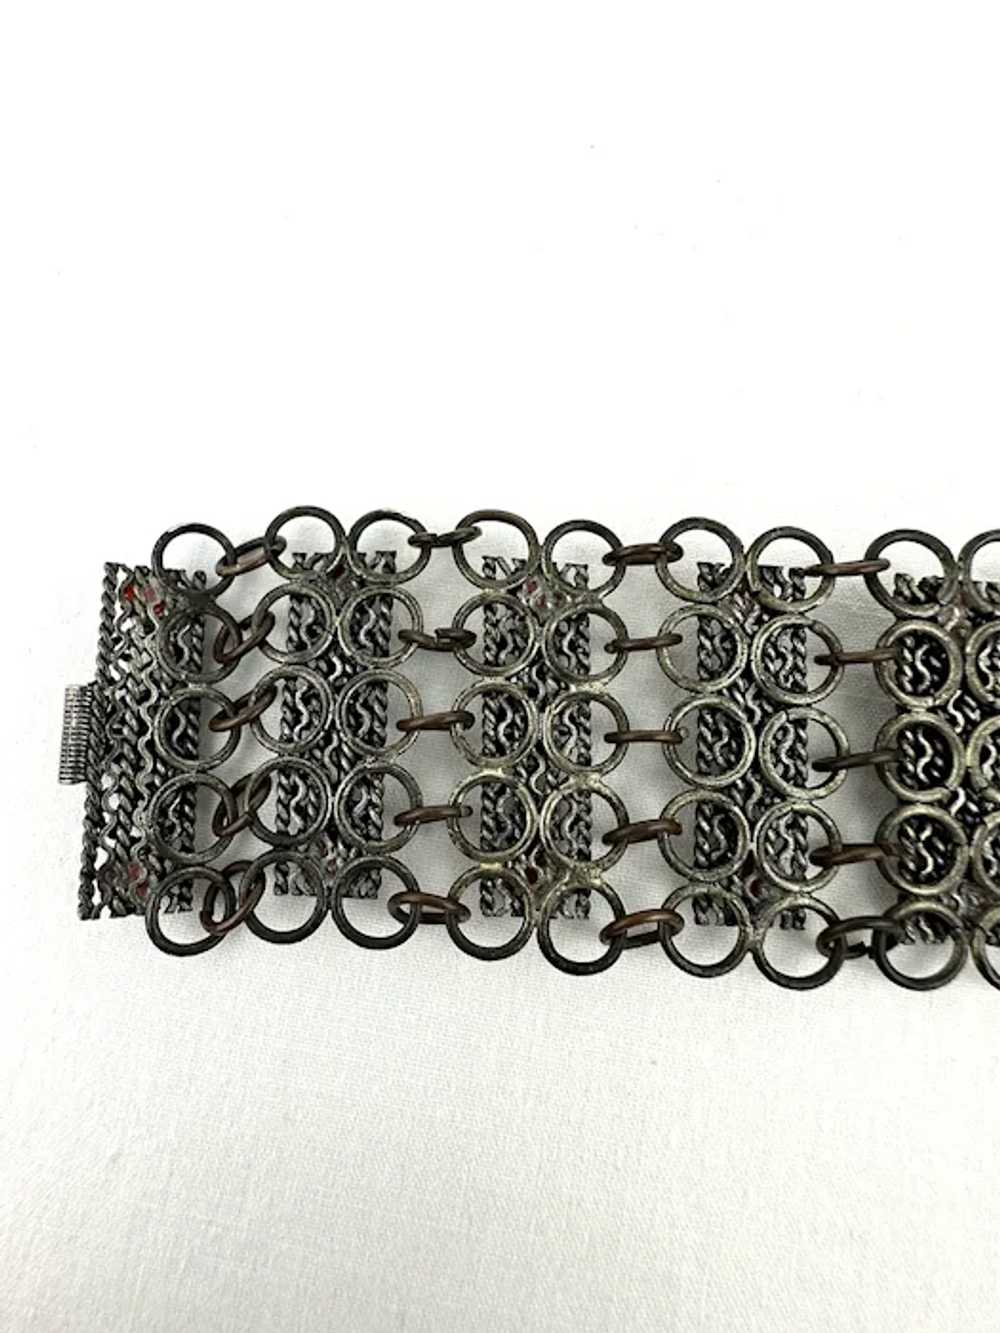 Art Deco Chain Mail and Coral Glass Cuff Bracelet - image 8